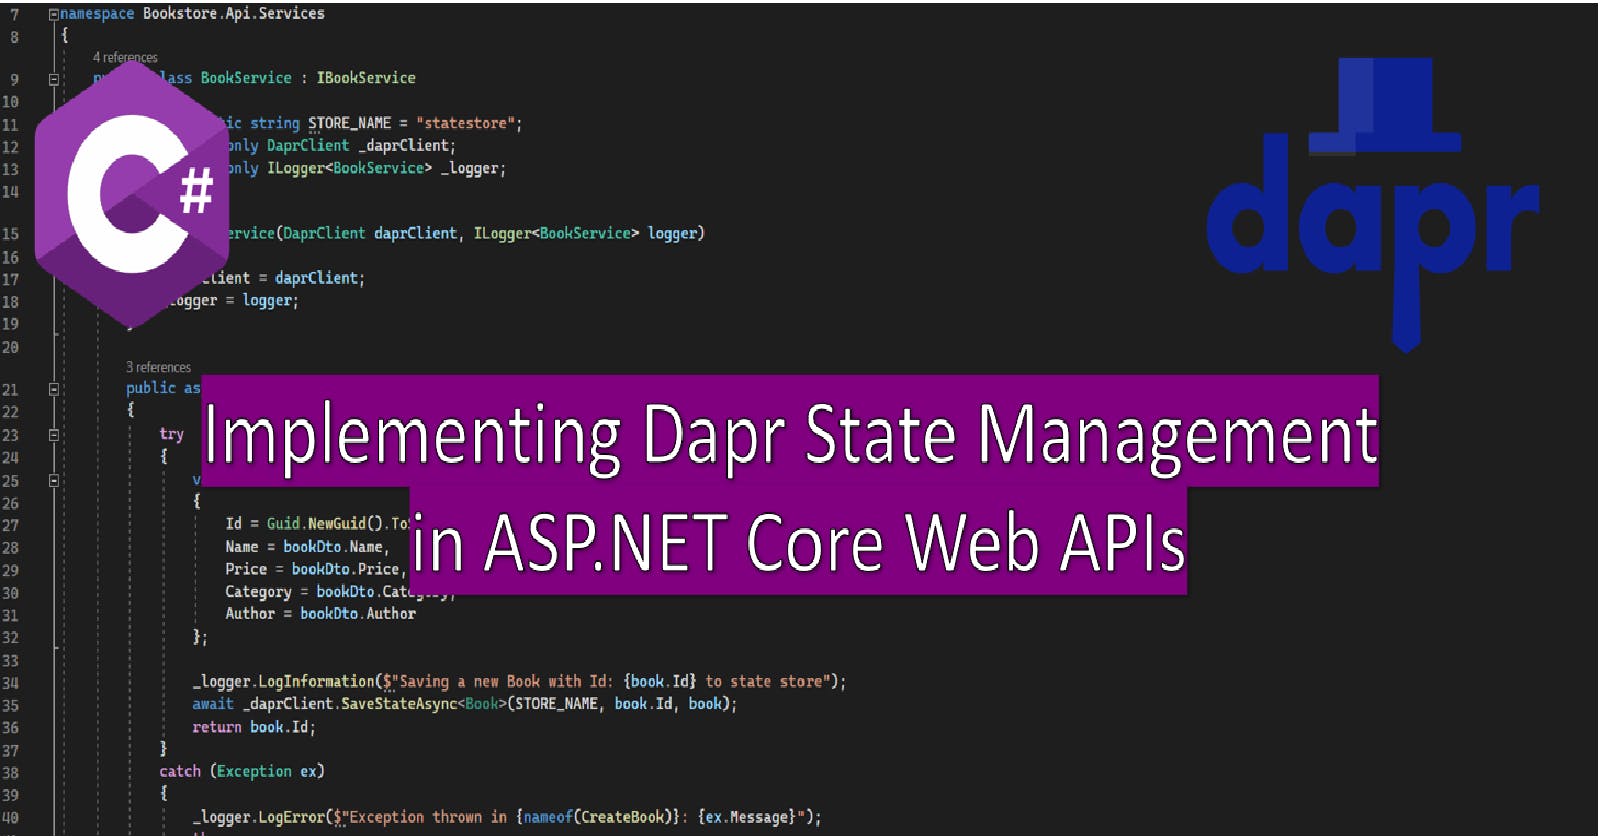 Implementing Dapr State Management in ASP.NET Core Web APIs